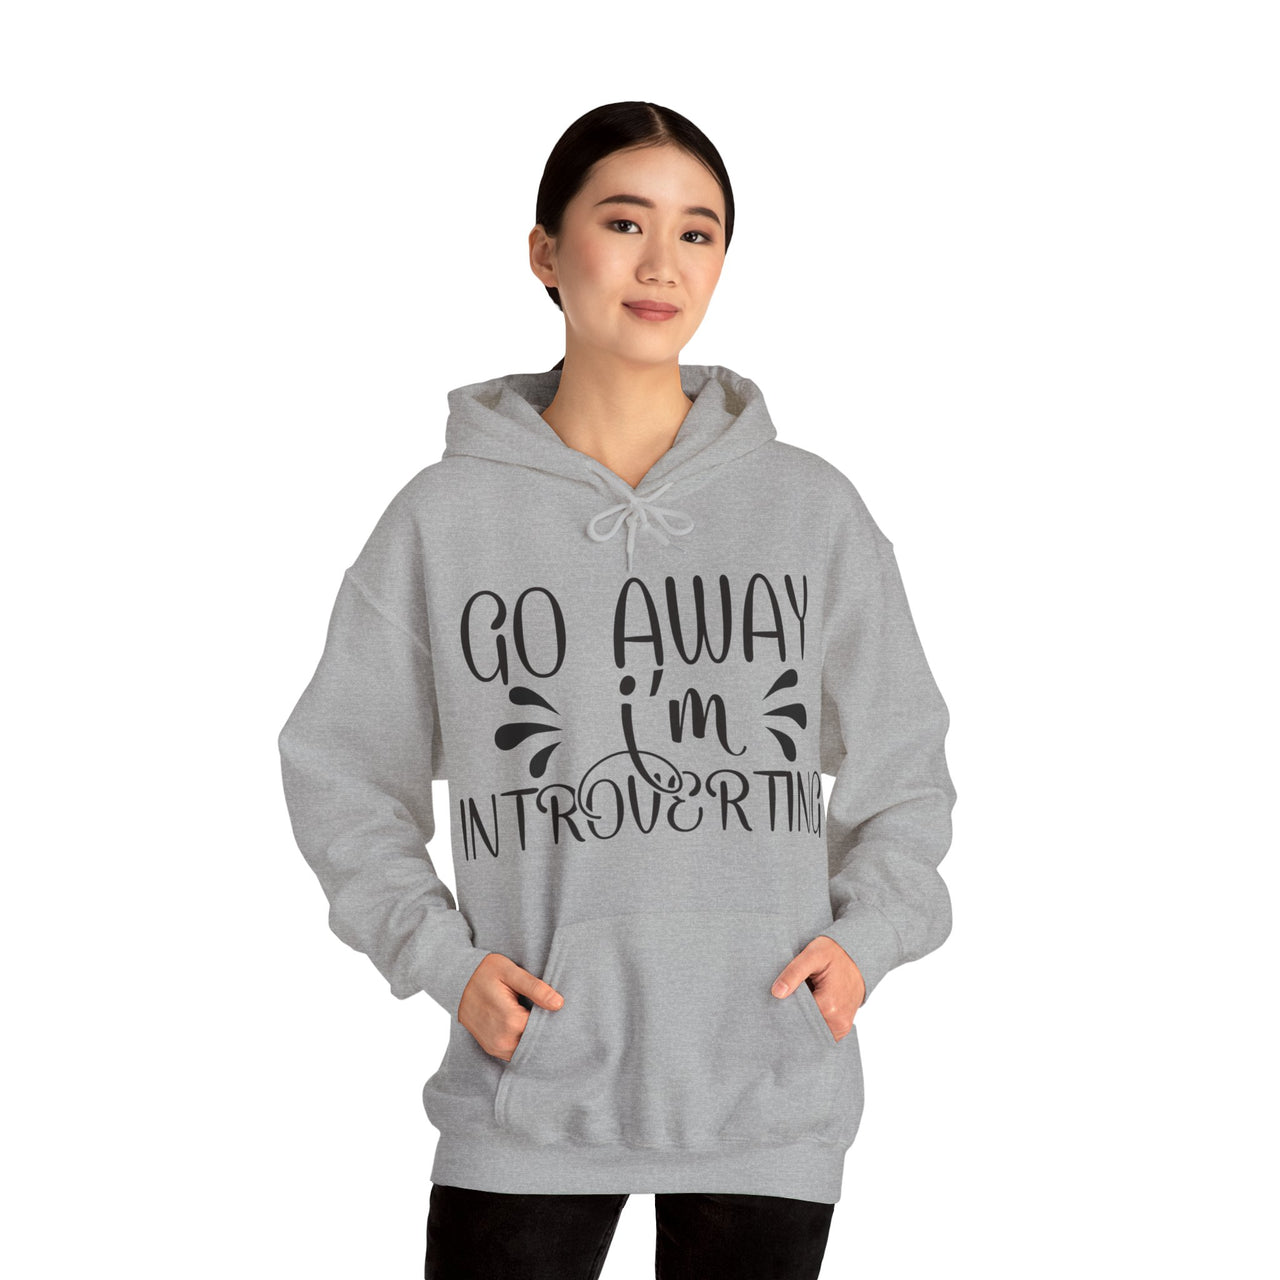 Go away im introverting Cozy Hoodie